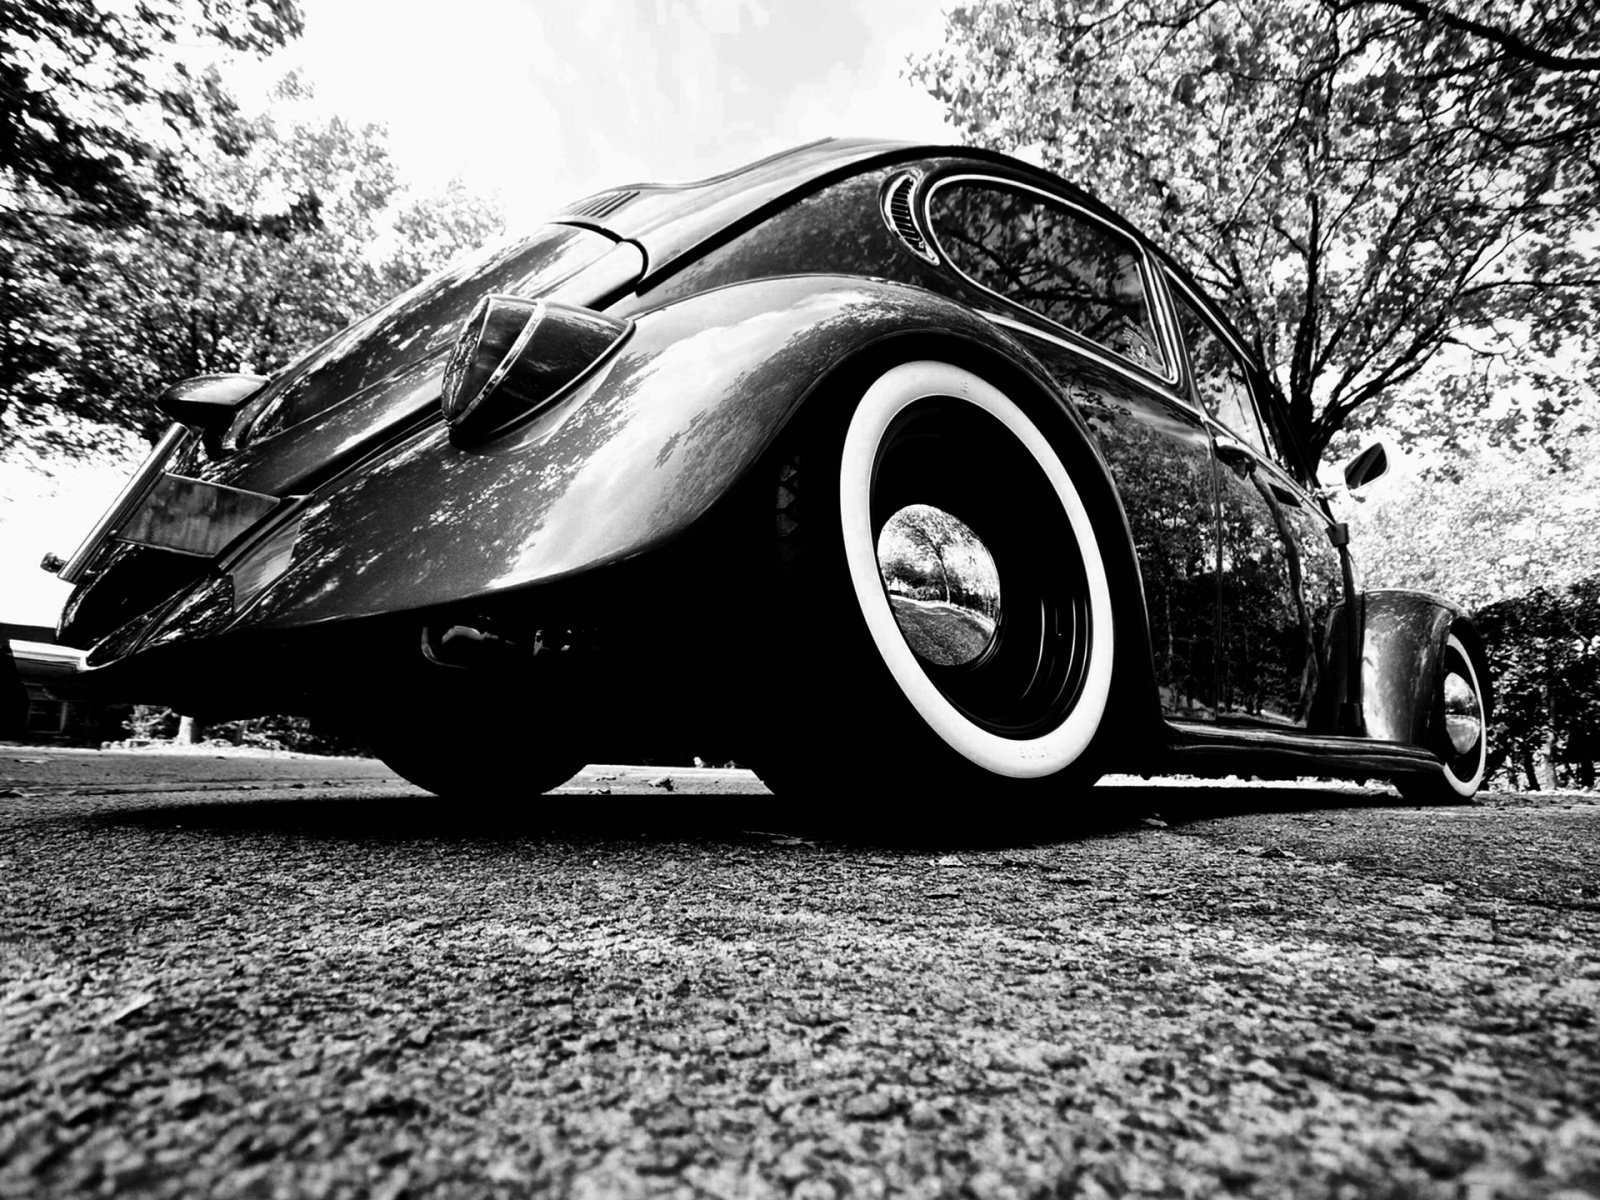 Old VW beetle With shiny Future   HD Wallpapers Widescreen   1600x1200 1600x1200